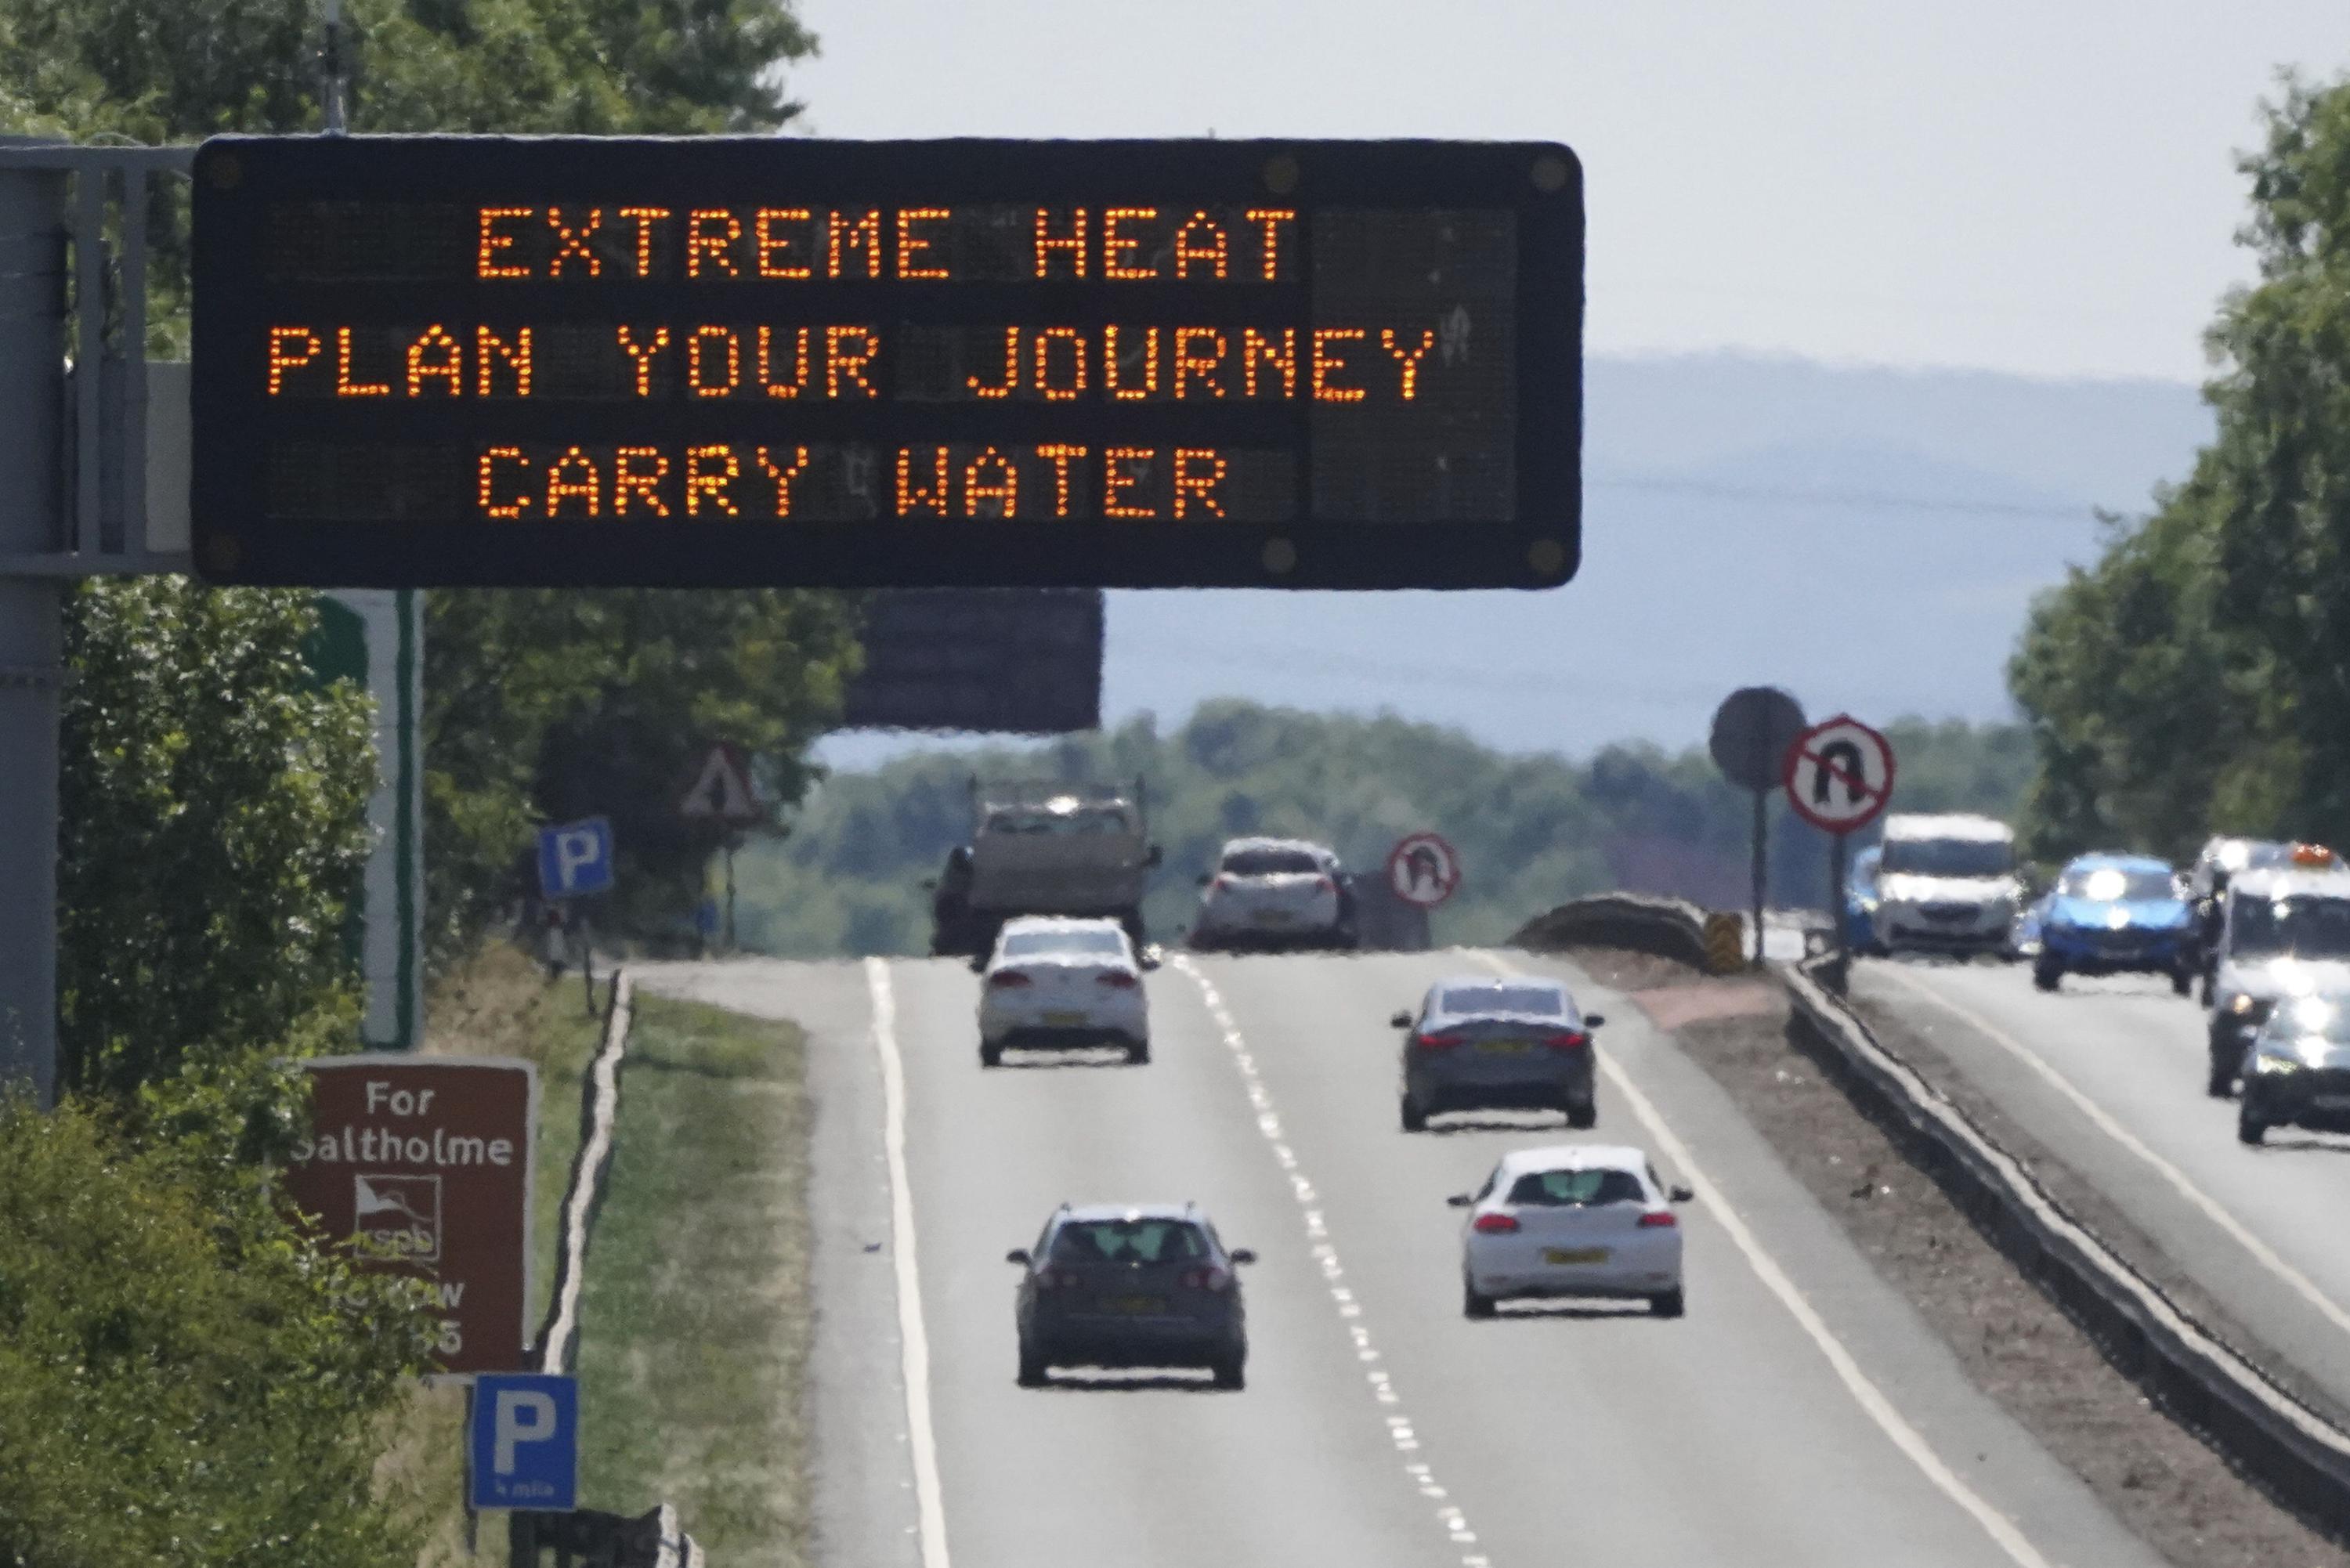 UK gets ready for travel disruptions as temps may hit 104 F